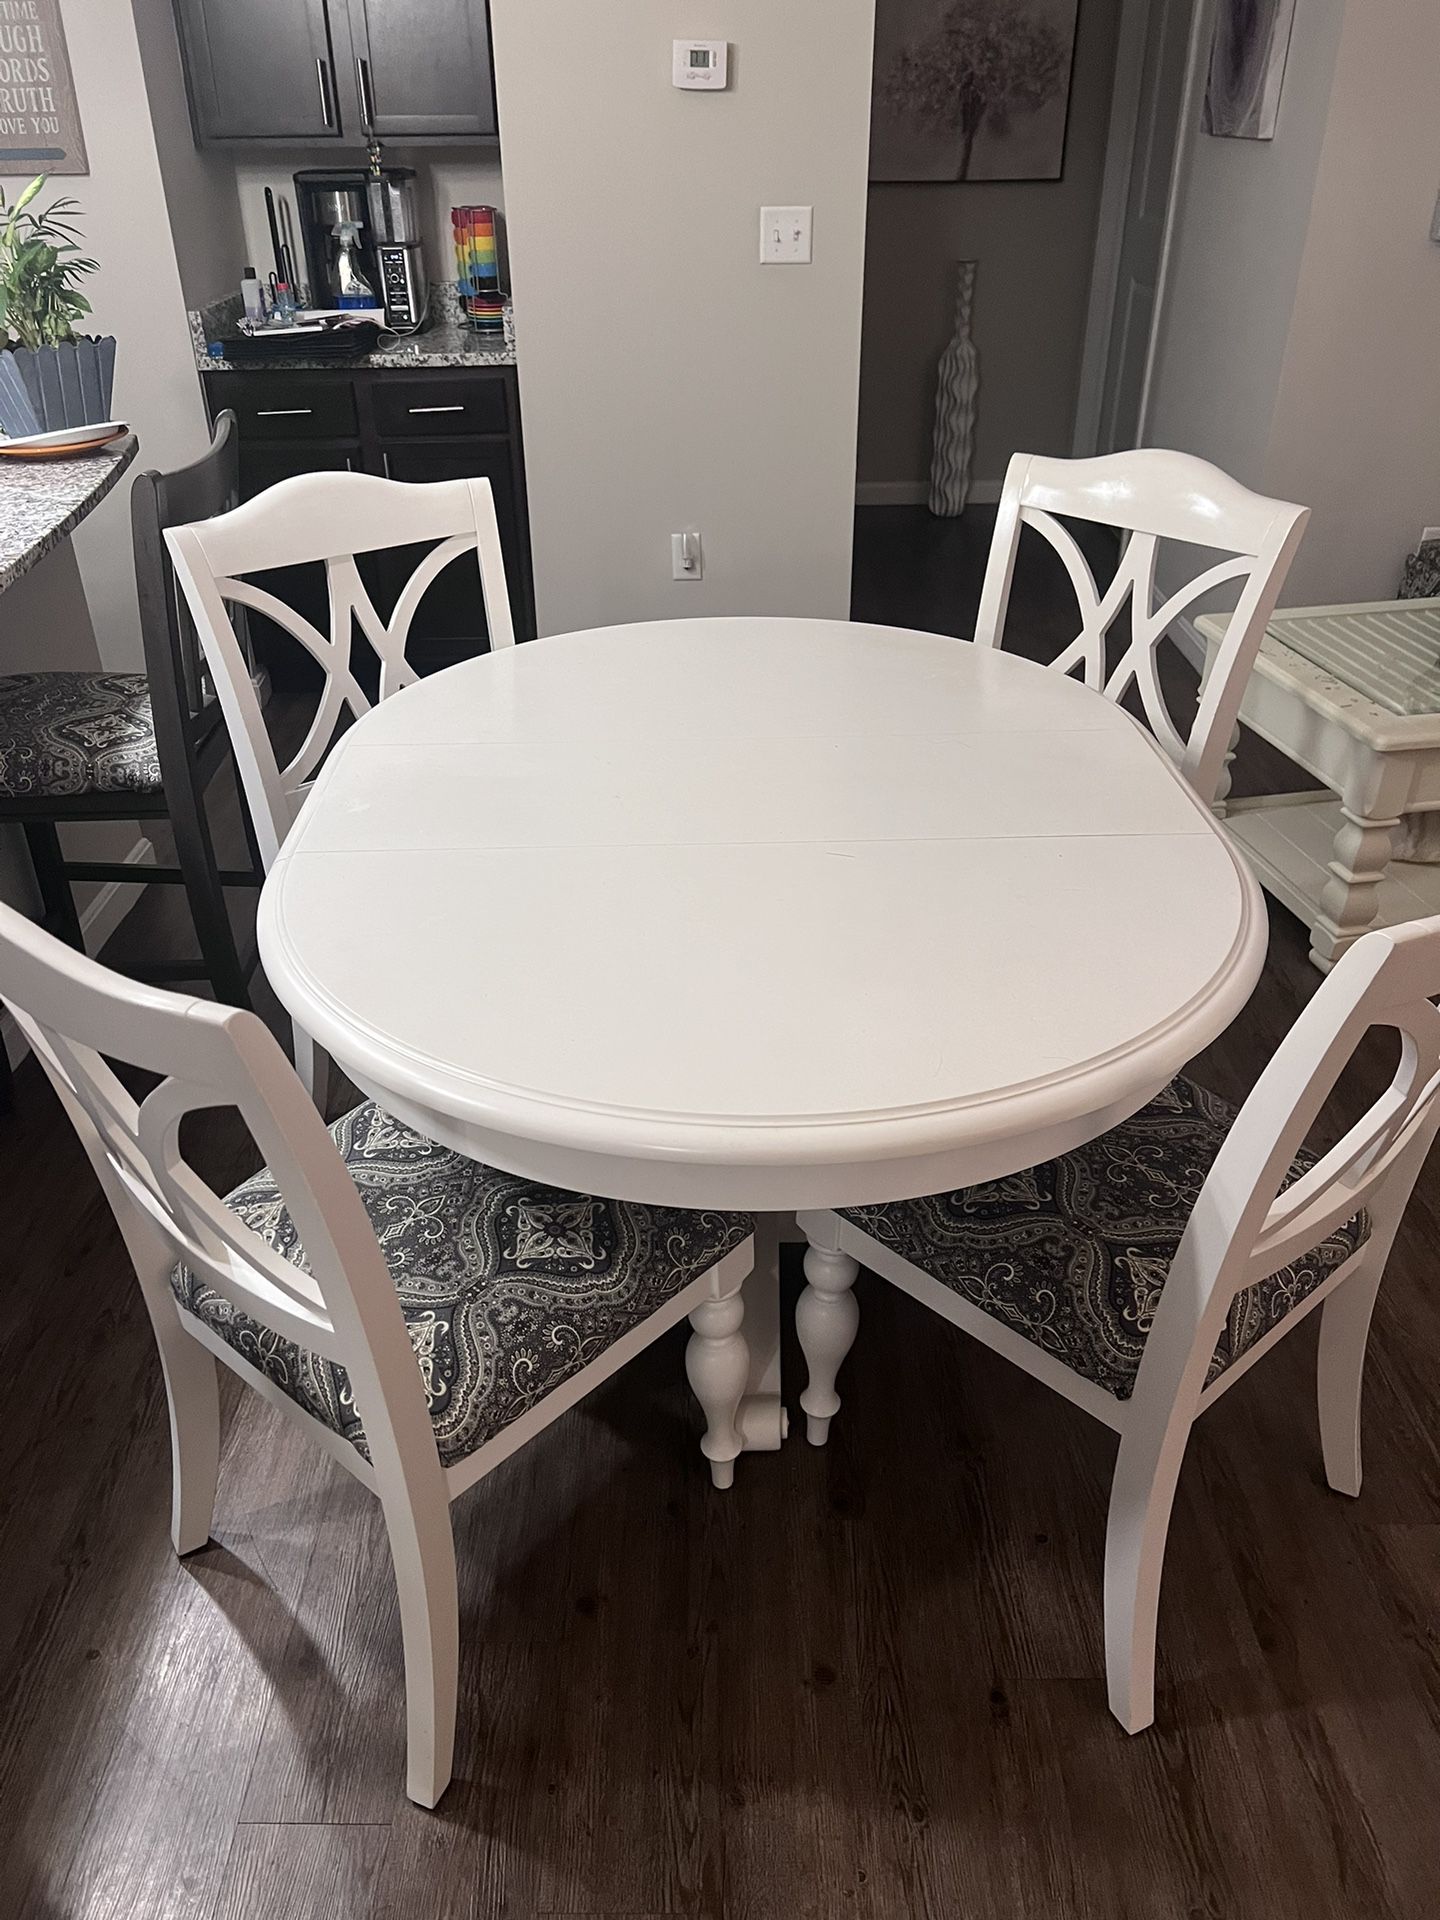 White Kitchen Table with 4 Chairs 